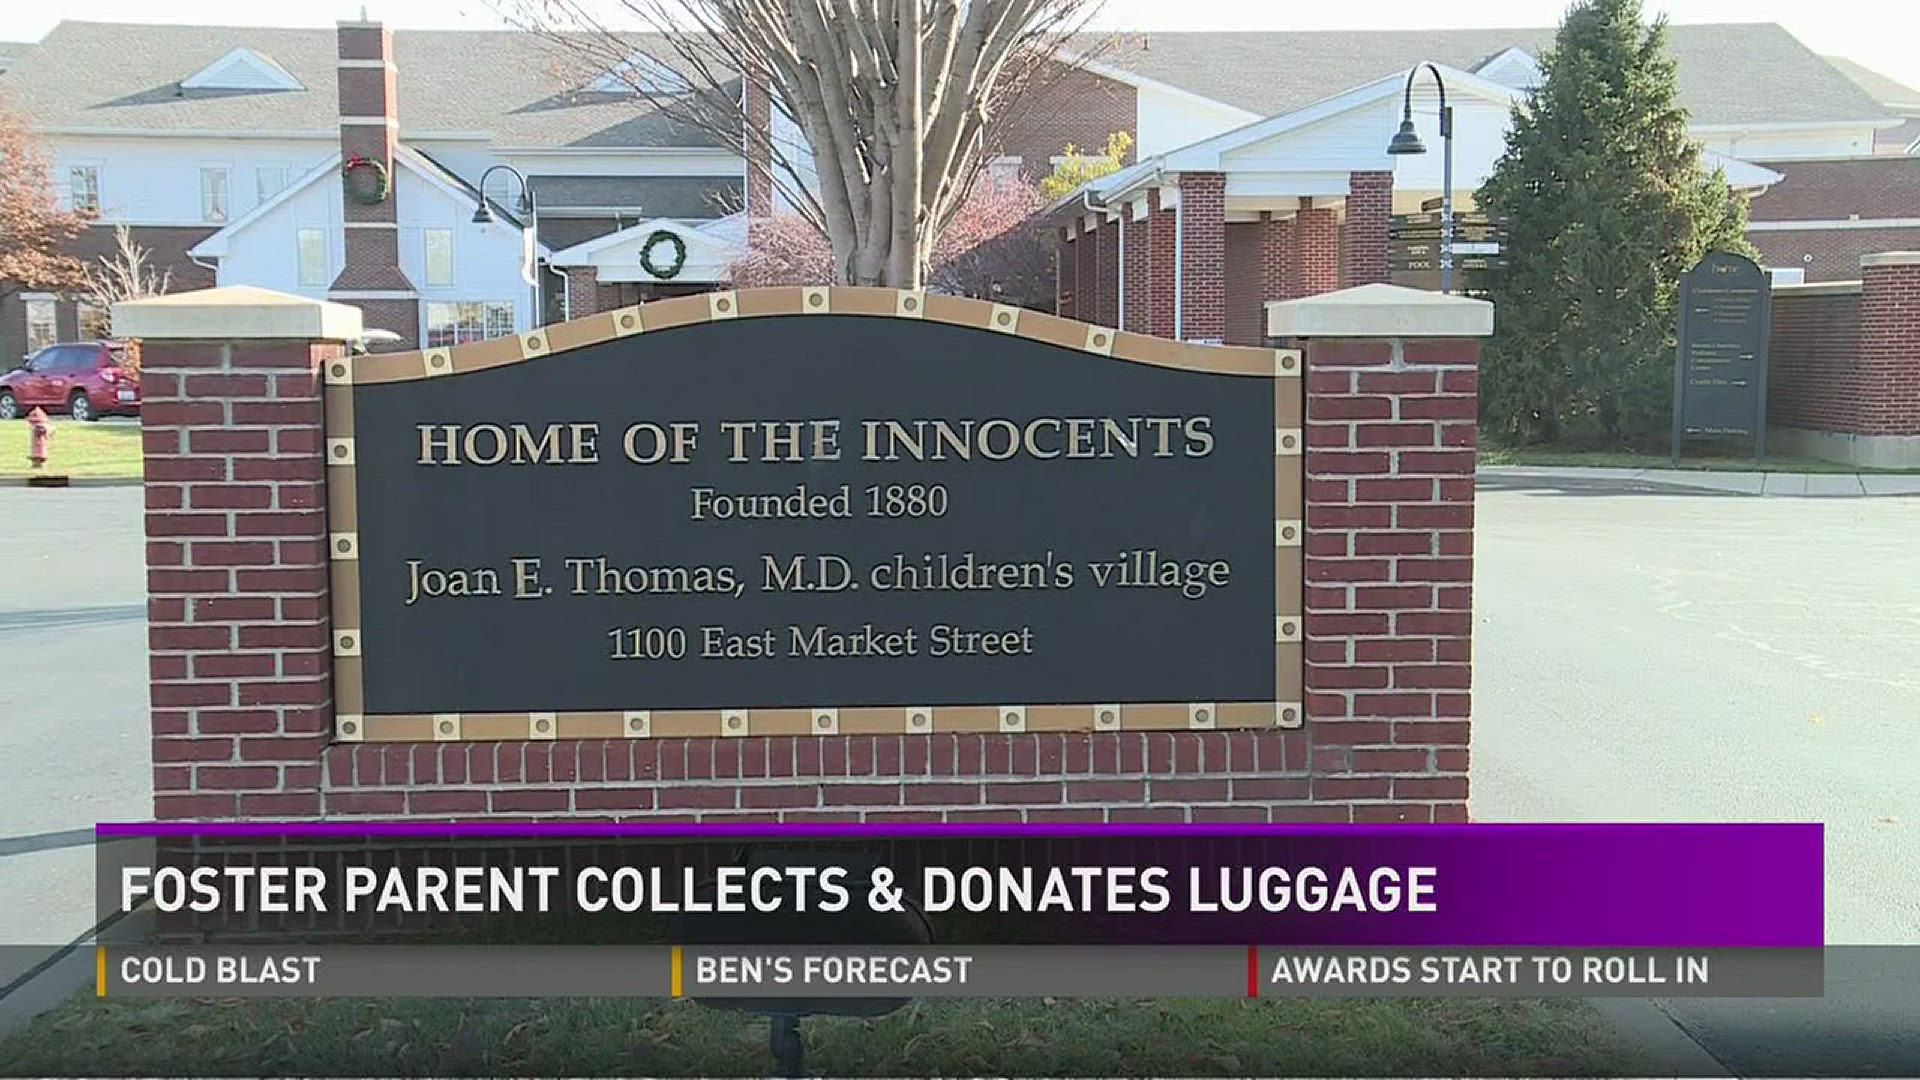 Foster parent collects & donates luggage